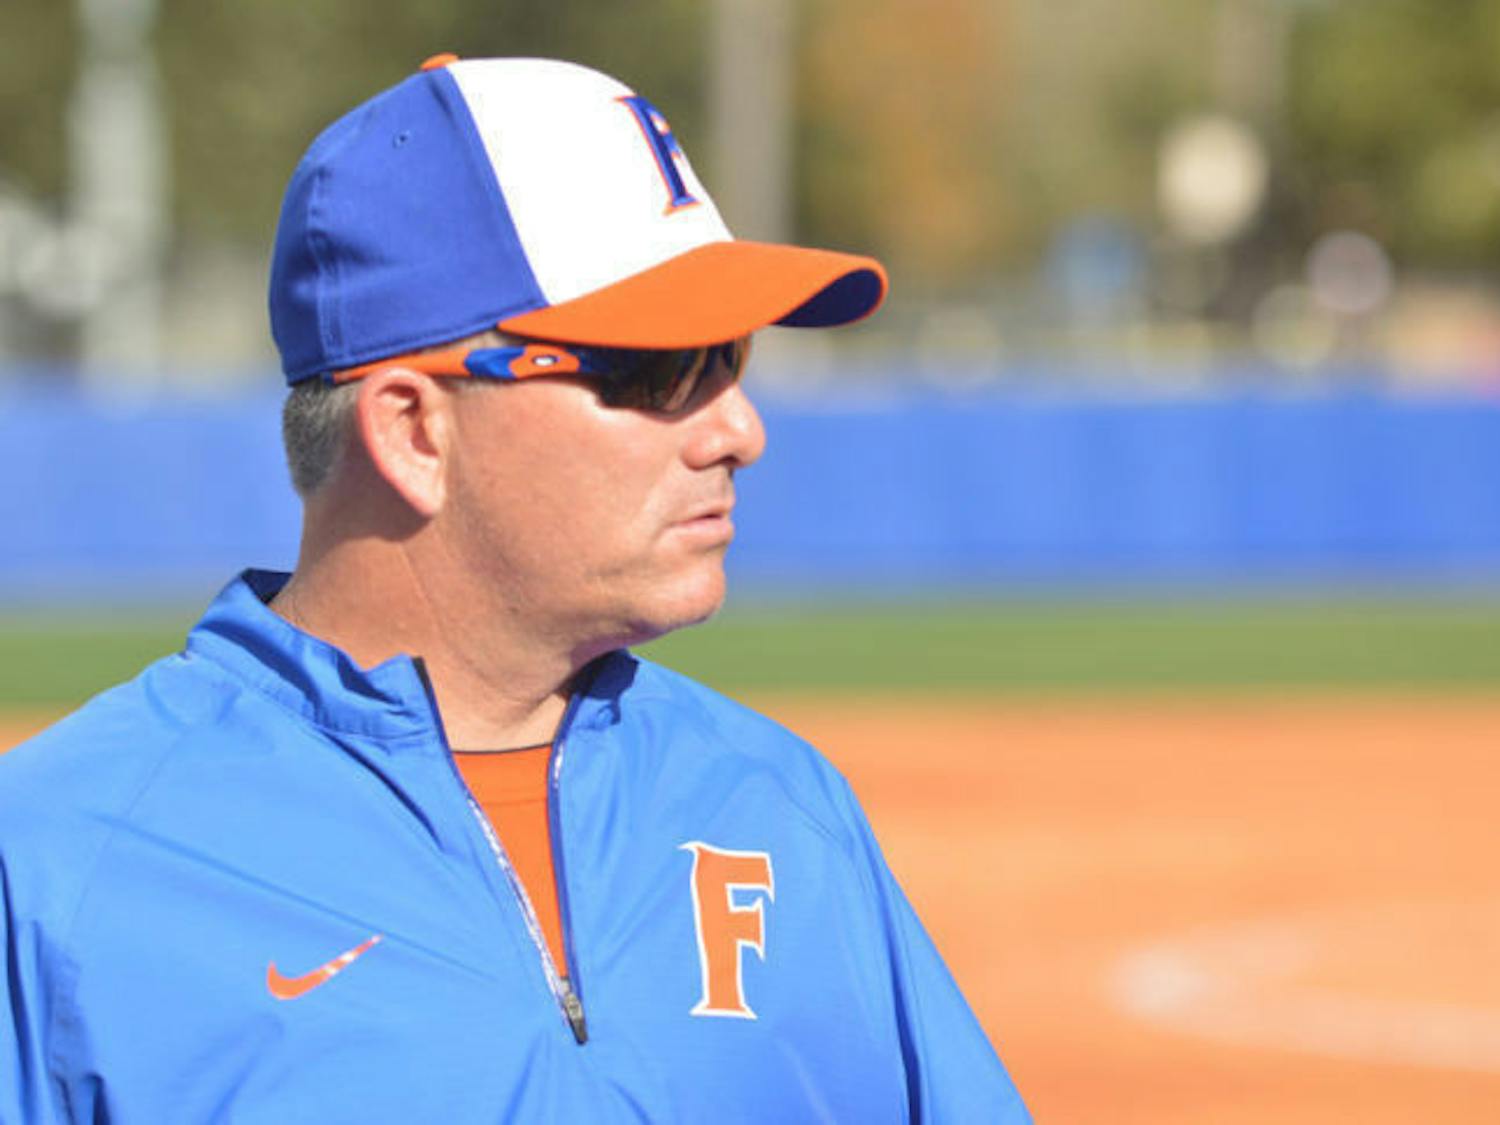 &nbsp;
The&nbsp;graduation of Kayli Kvistad left an open spot at first base for the Florida softball team. Coach Tim Walton will likely either start one of his freshmen or sophomore Jordan Matthews there this season.